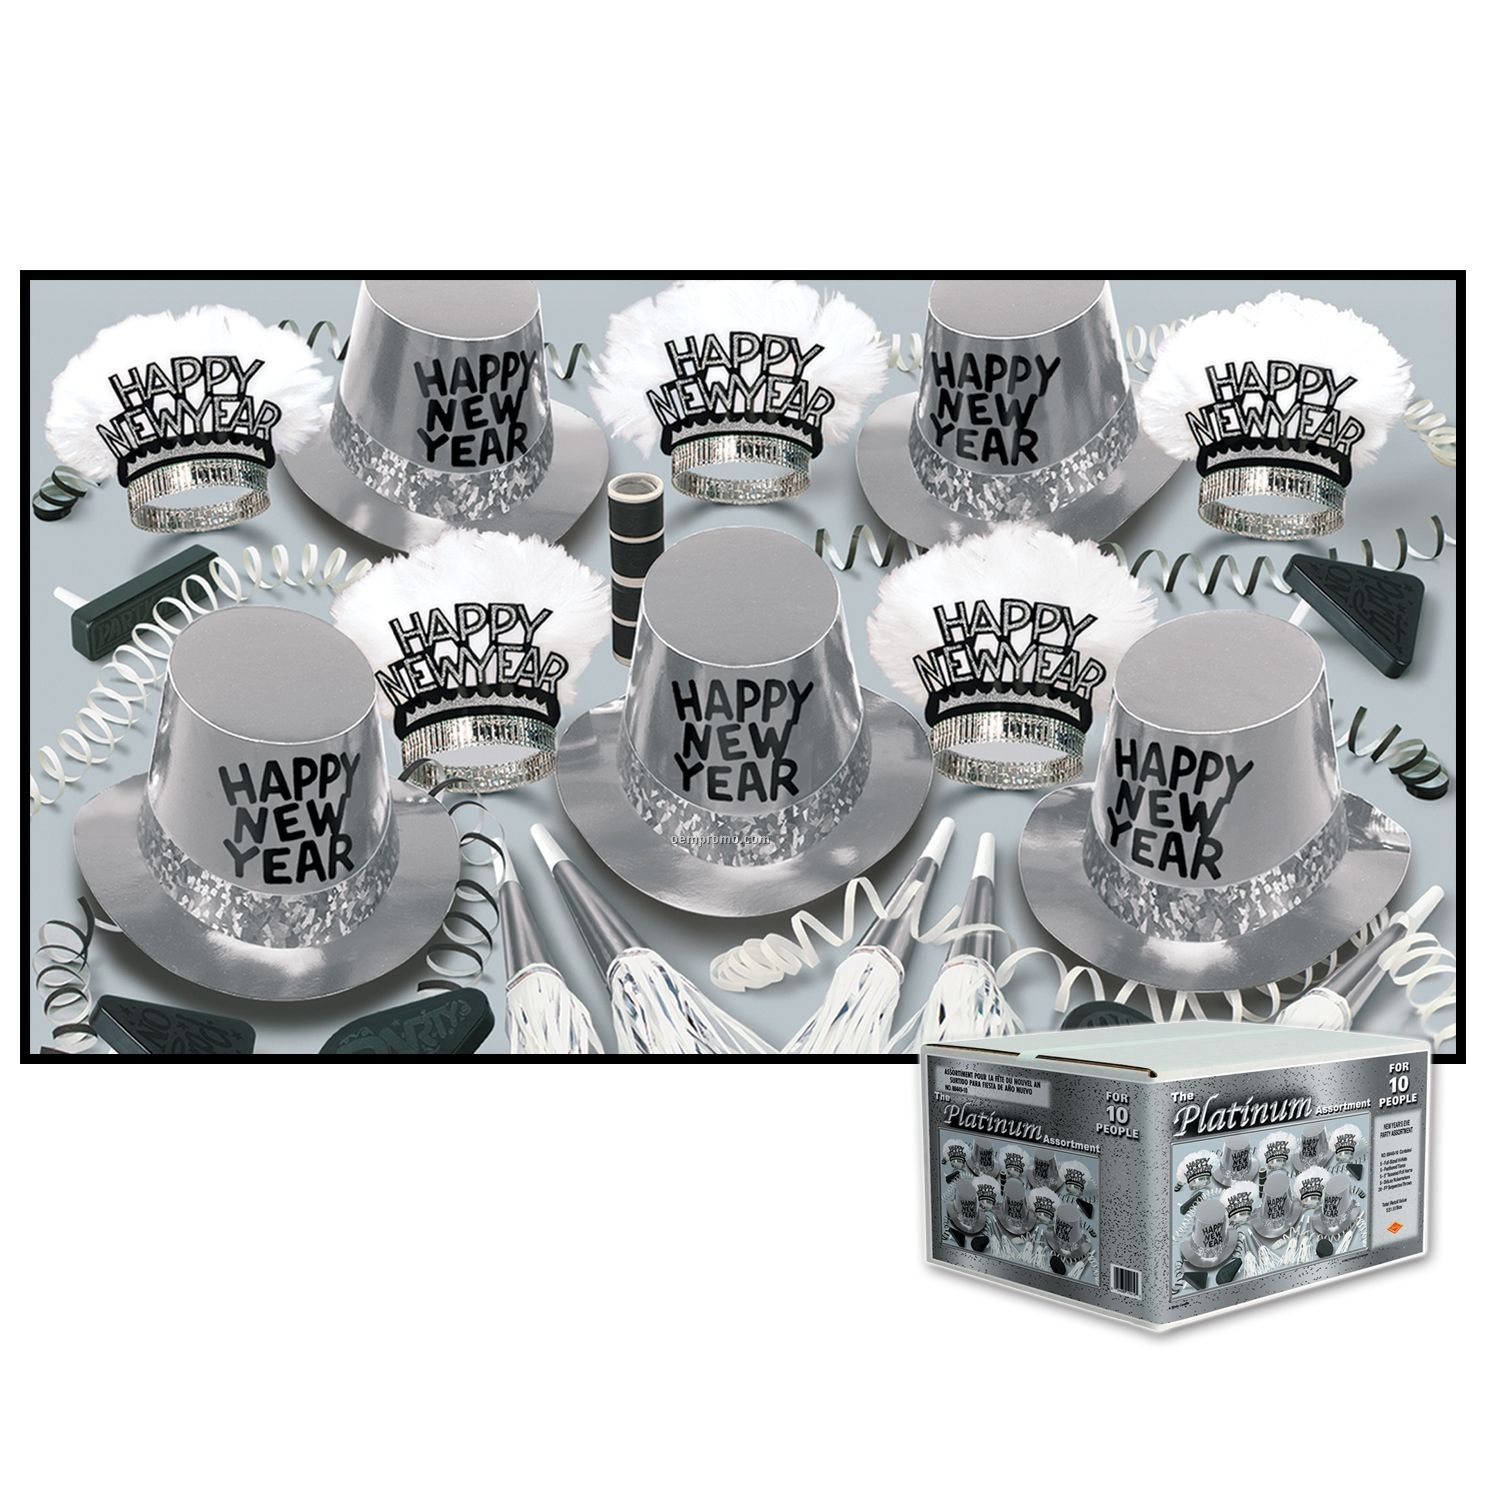 The Platinum Assortment For 10 People W/ Retail Price Label